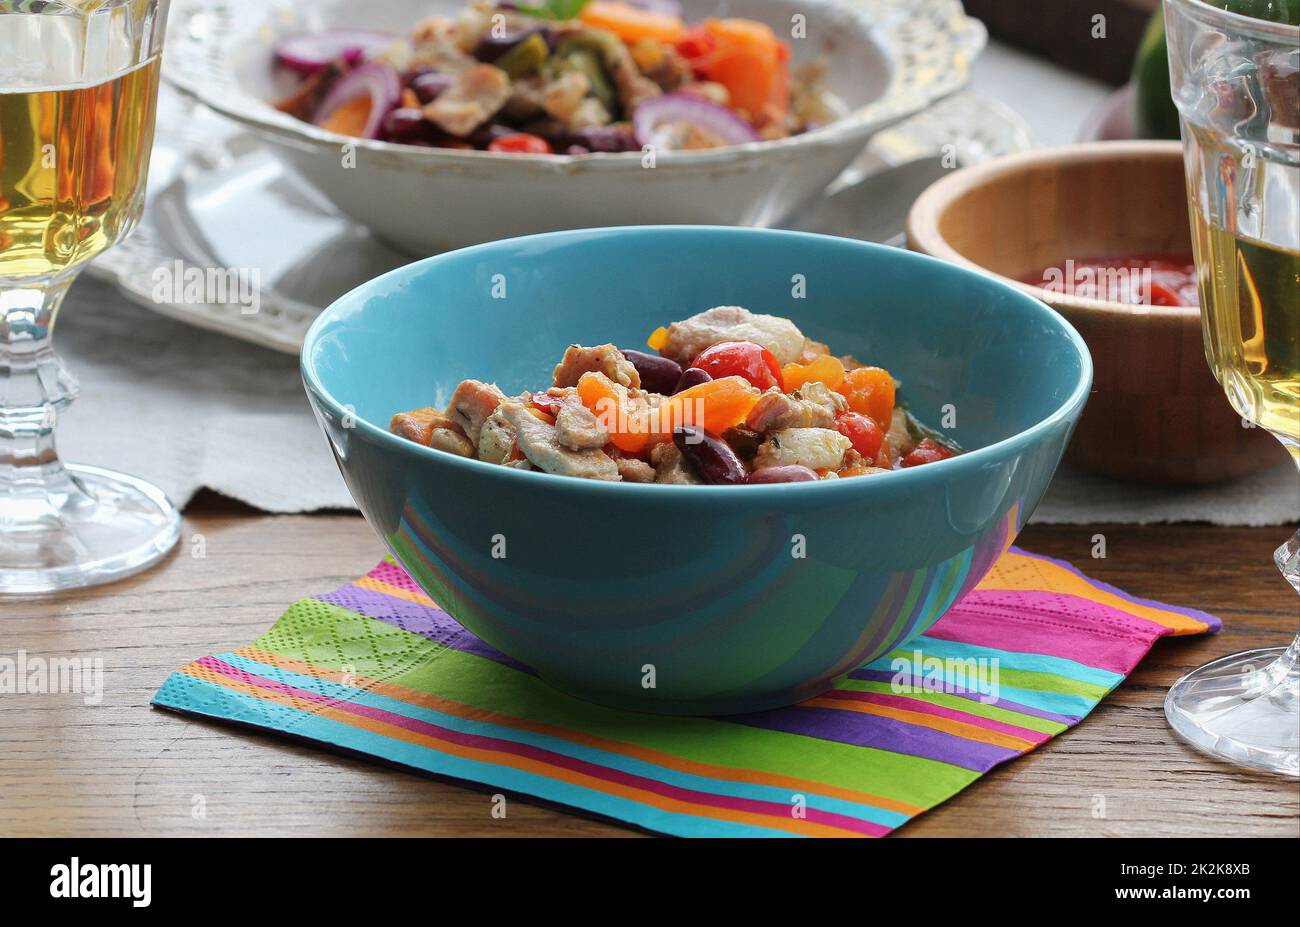 Meat Stew. Roasted beef meat. Braised beef portion meat. Slow cooked meat with vegetables served in bowl and wine glasses Stock Photo